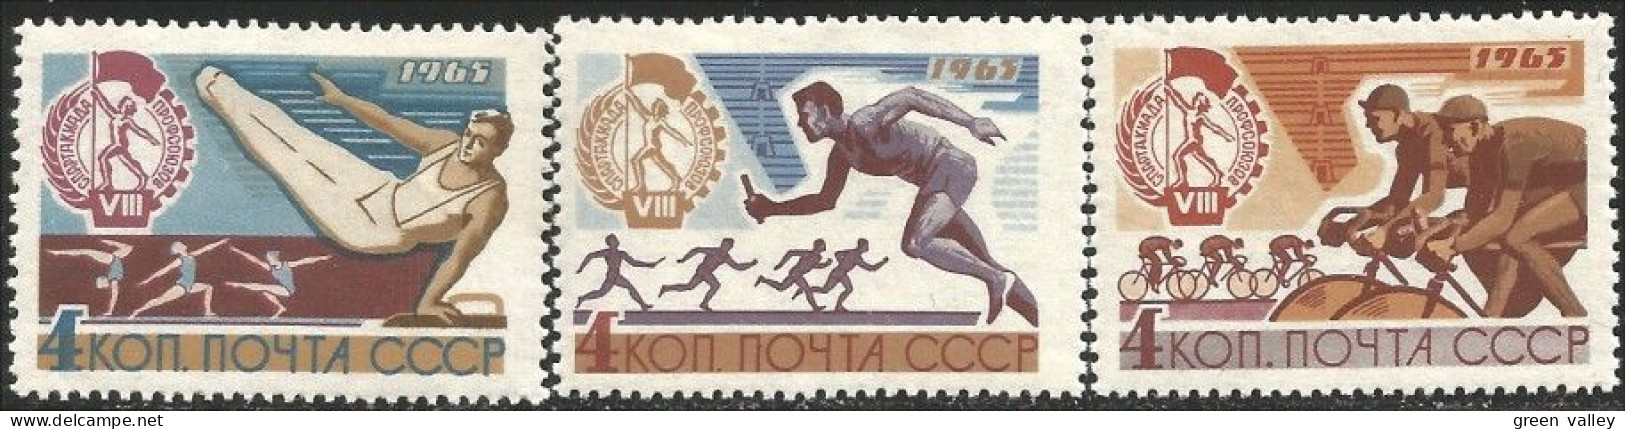 772 Russie 1965 Spartakiades Spartacist Games MNH ** Neuf SC (RUC-350) - Used Stamps